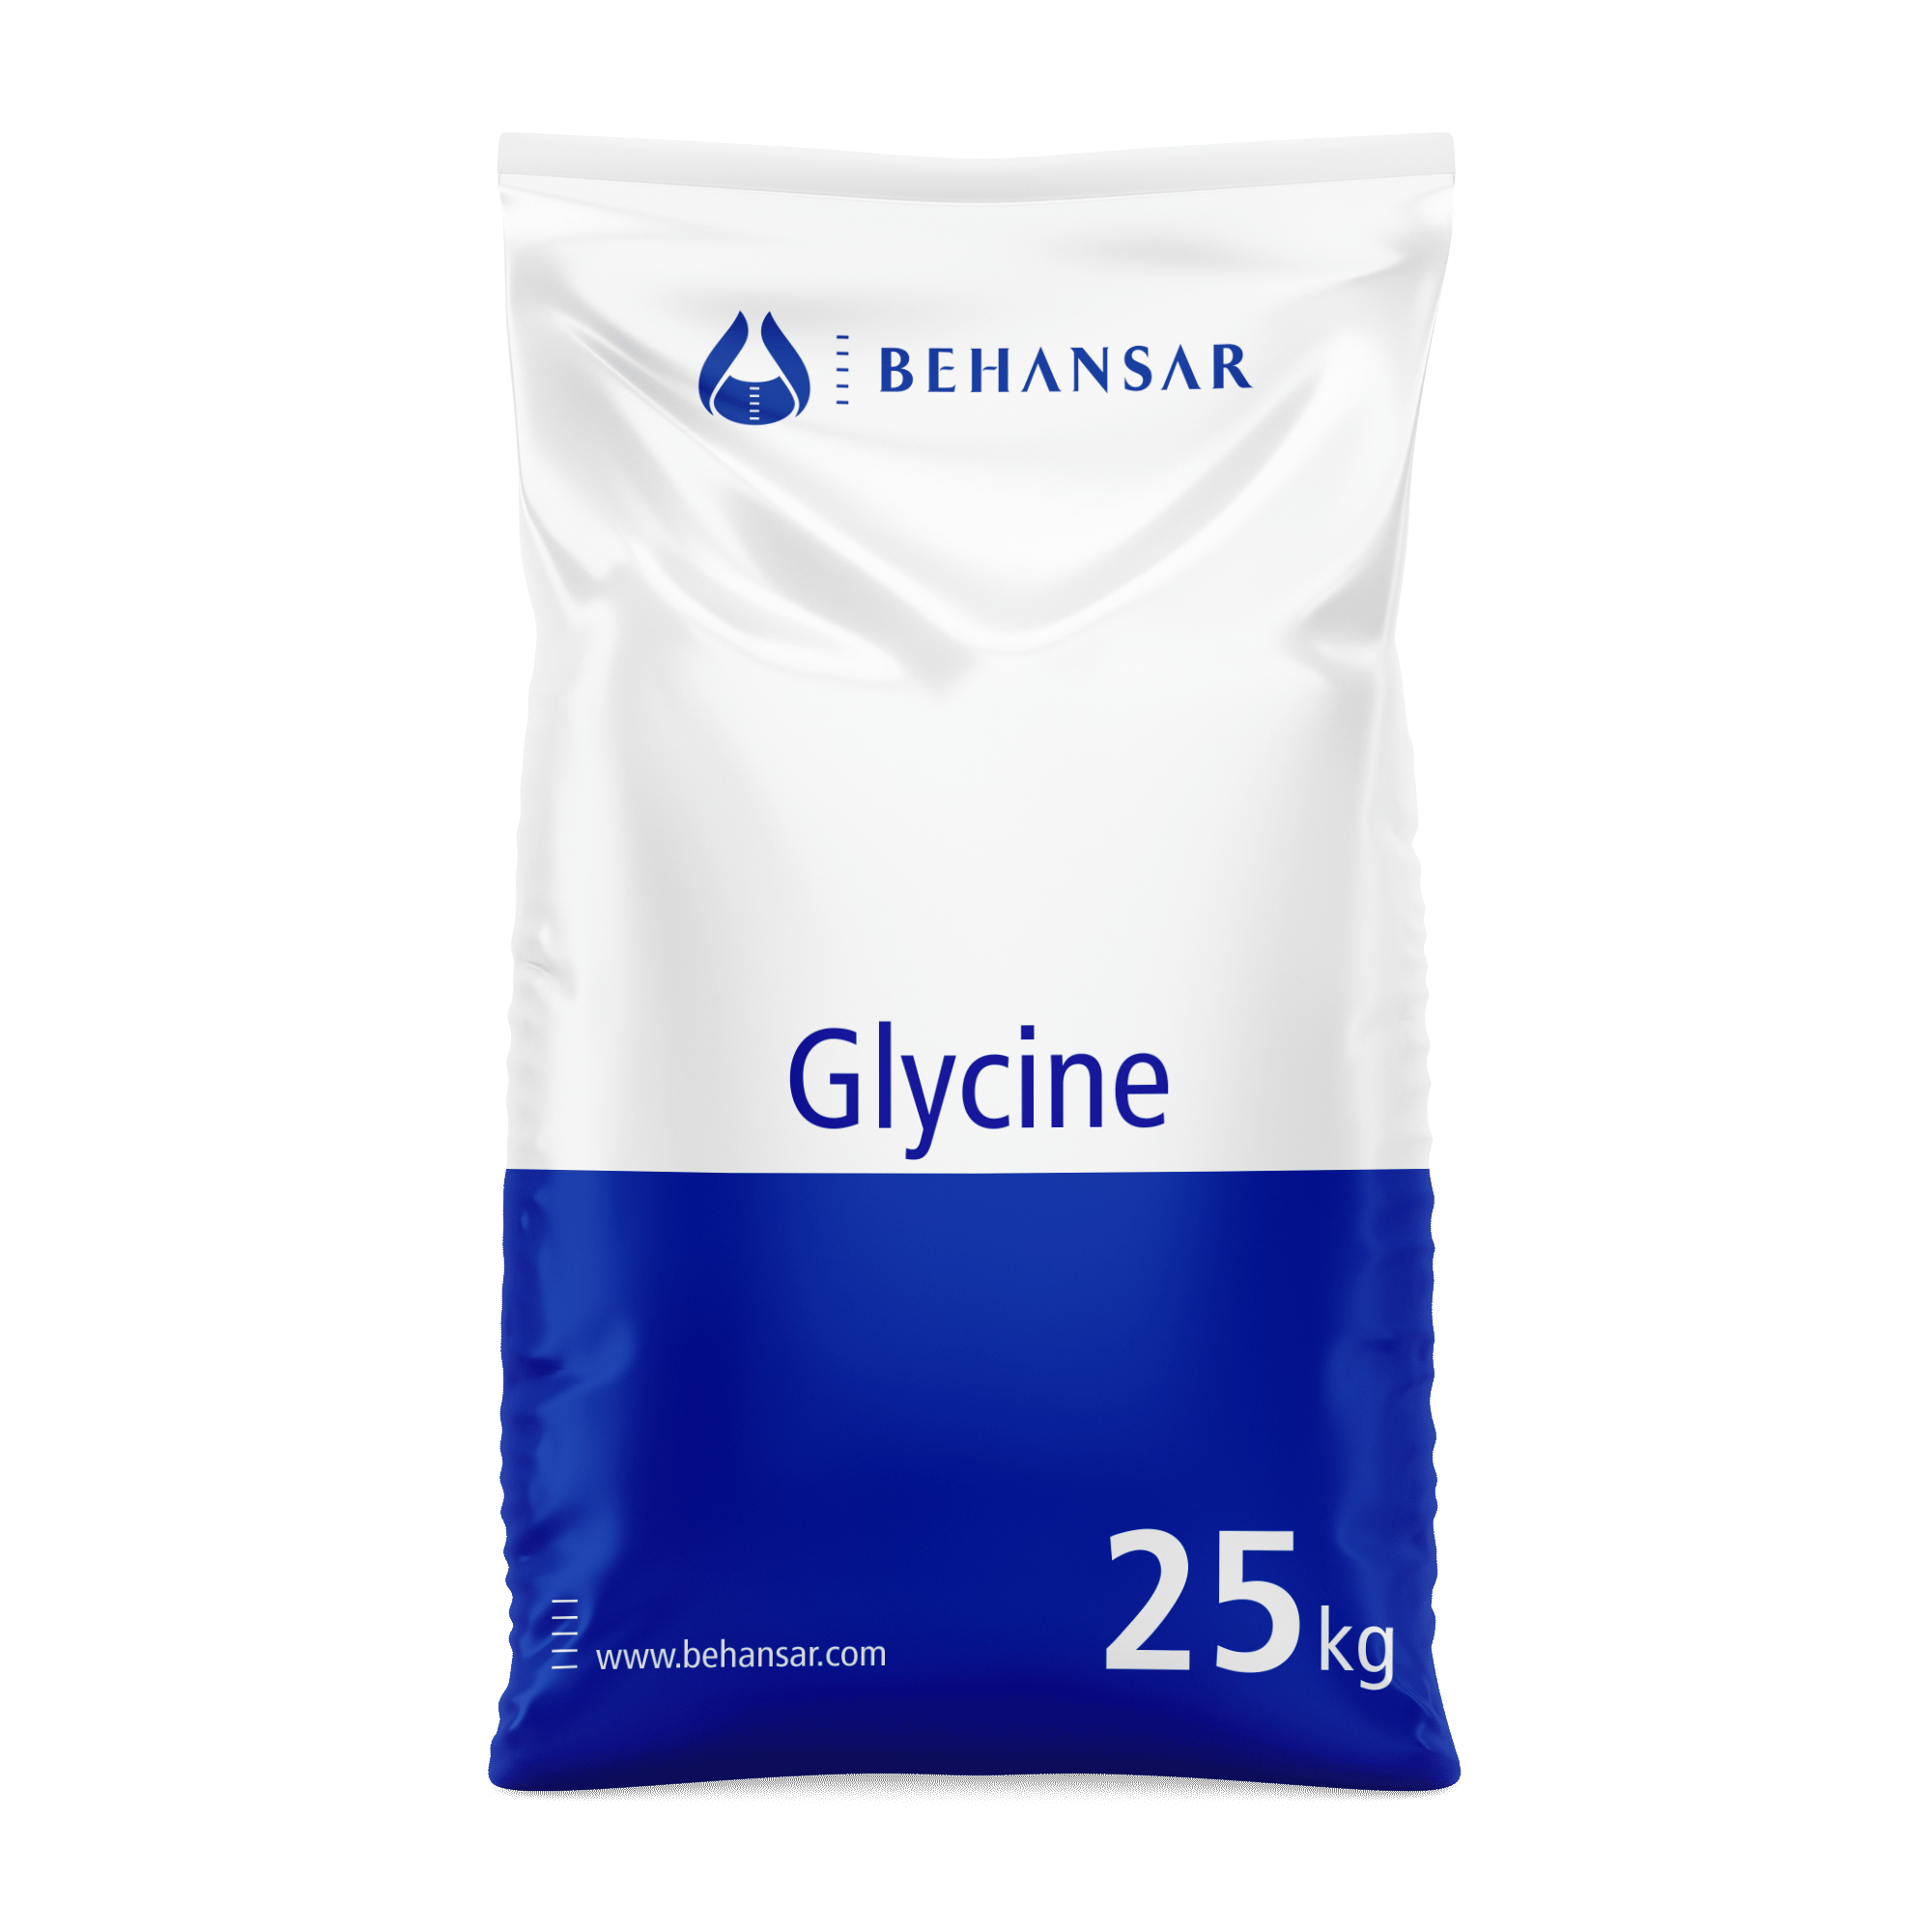 Glycine is one of the products of Behansar Co